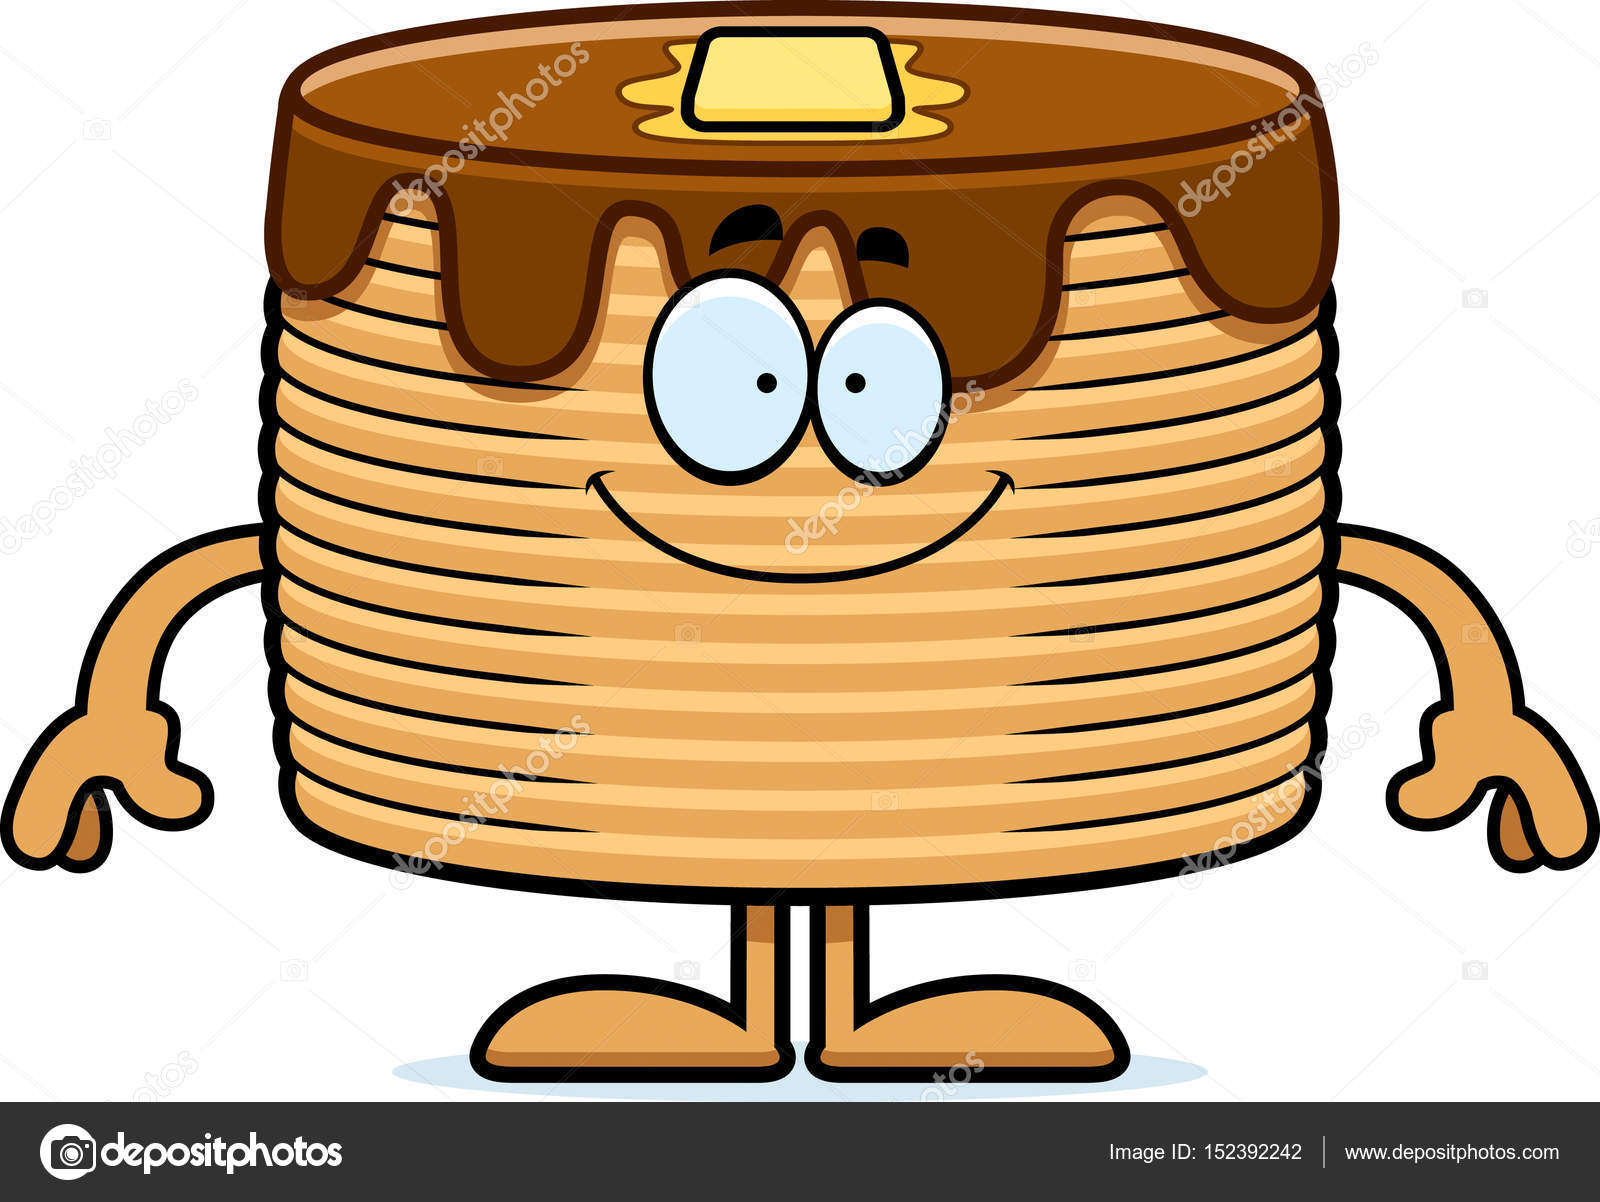 Free Pancake Pictures, Download Free Clip Art, Free Clip Art on Clipart  Library